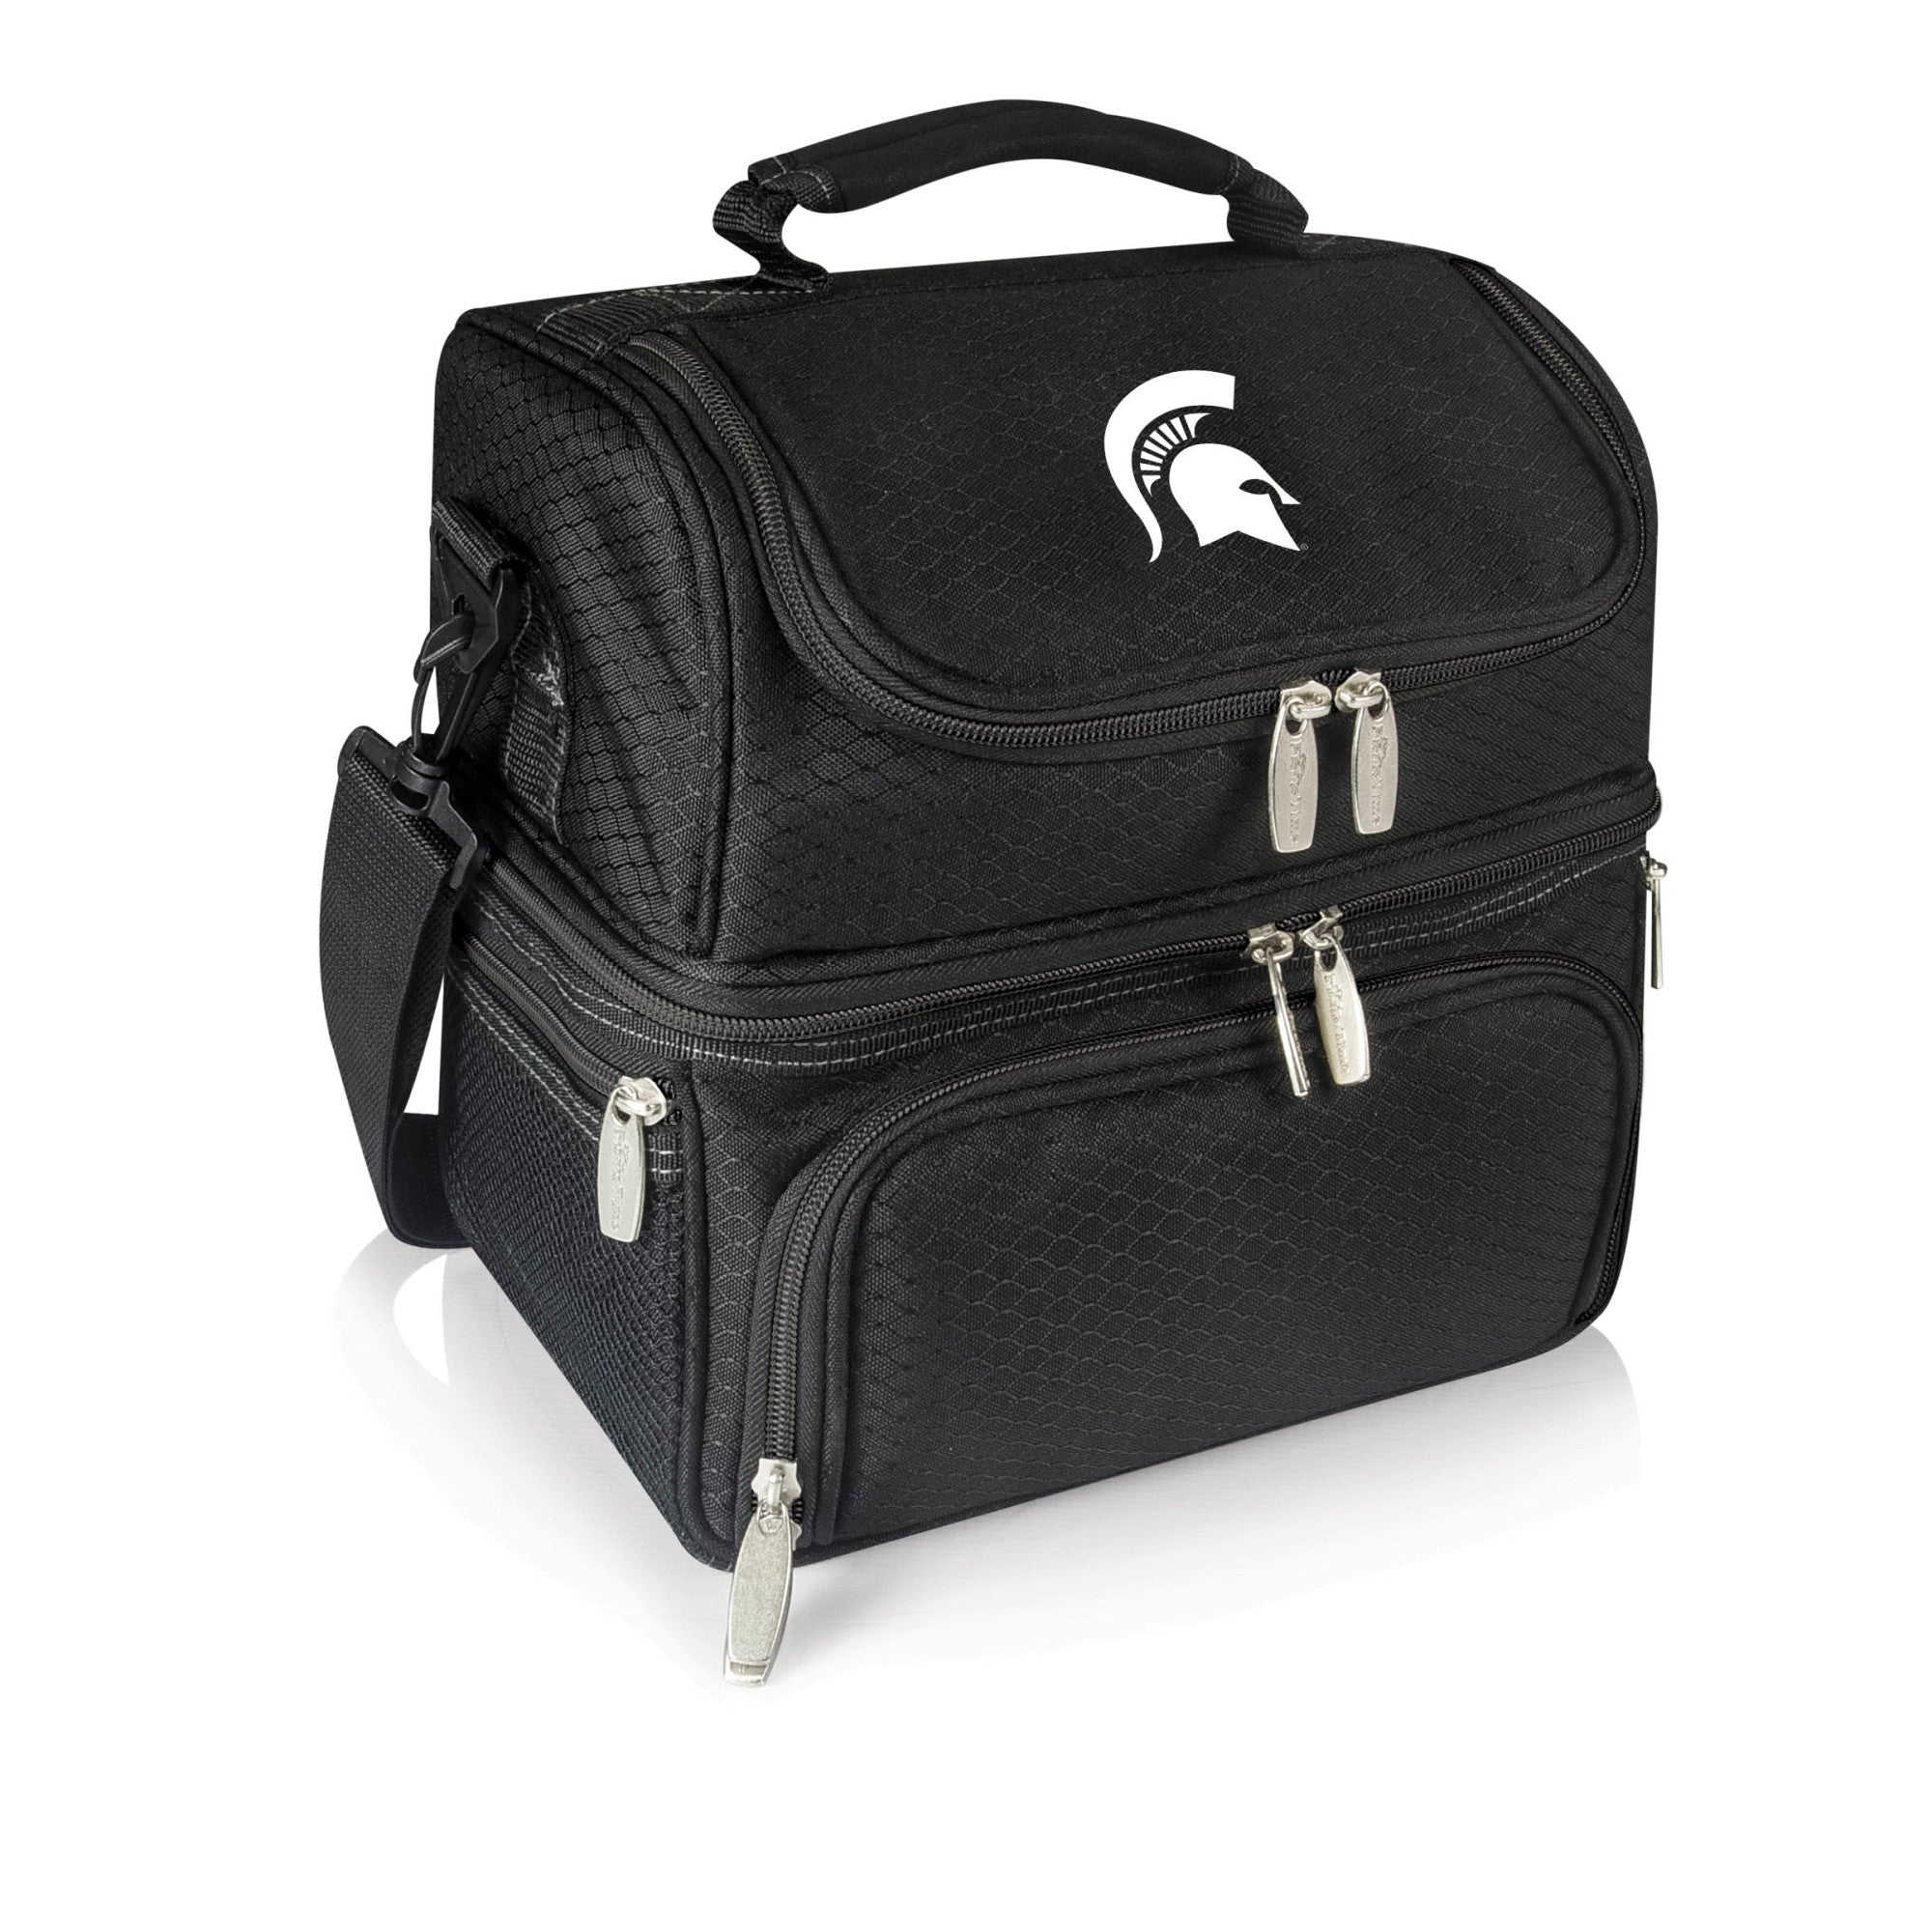 Michigan State Spartans - Pranzo Lunch Bag Cooler with Utensils